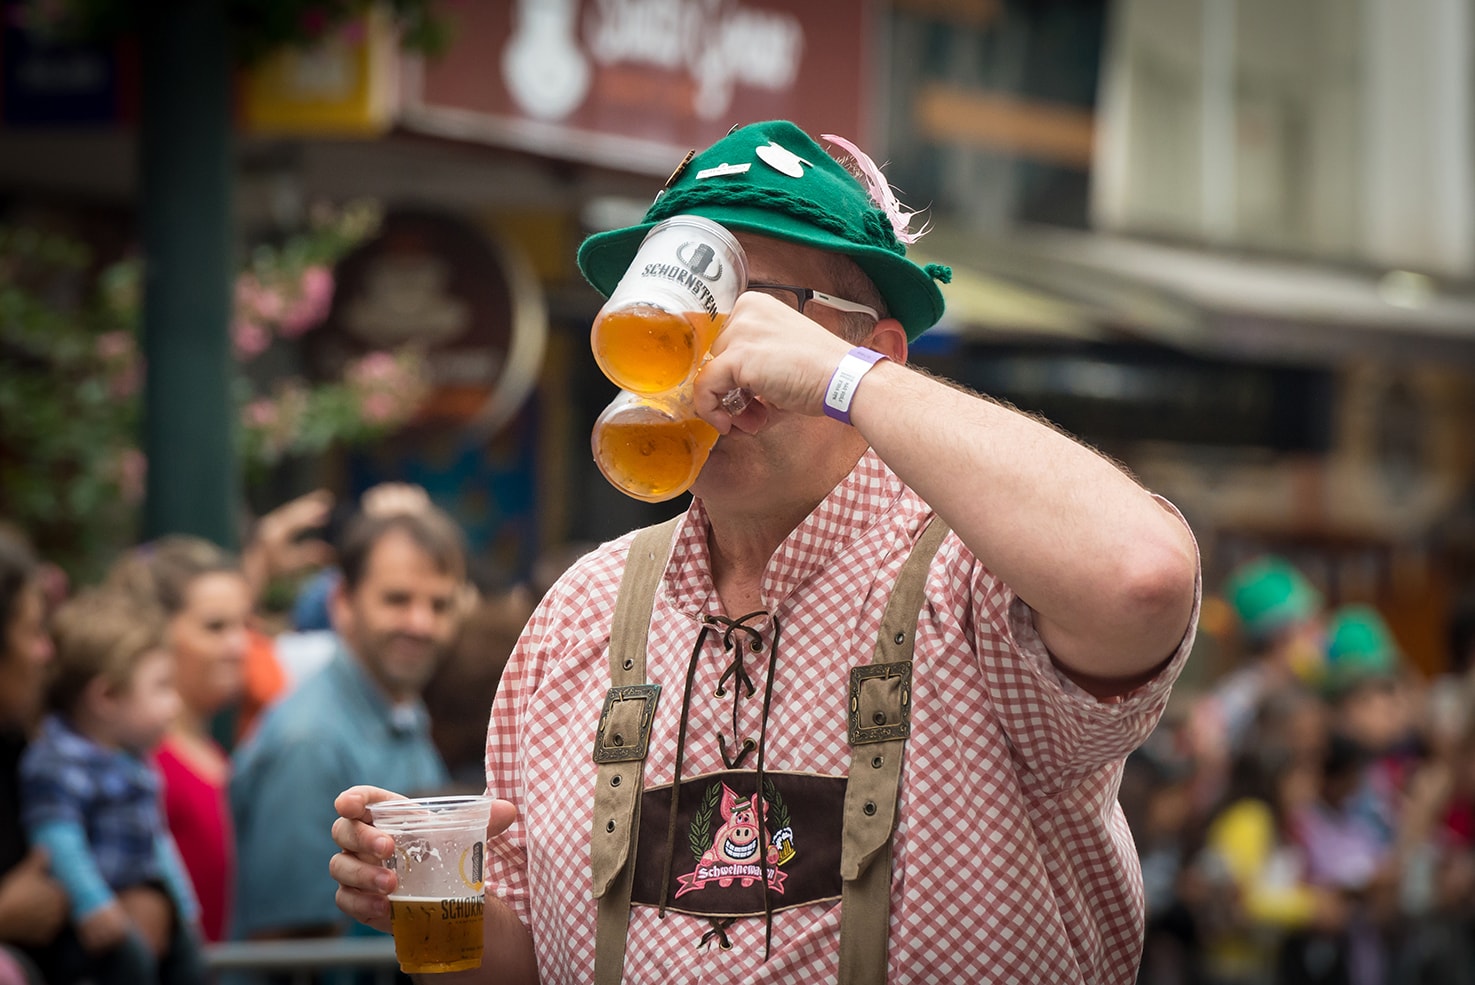 Blumenau, Santa Catarina, Brazil - October 17, 2015: A close-up of a man dressed in German costume drinking three glasses of beer on the street parade in the heart of Blumenau celebrating the Oktoberfest.